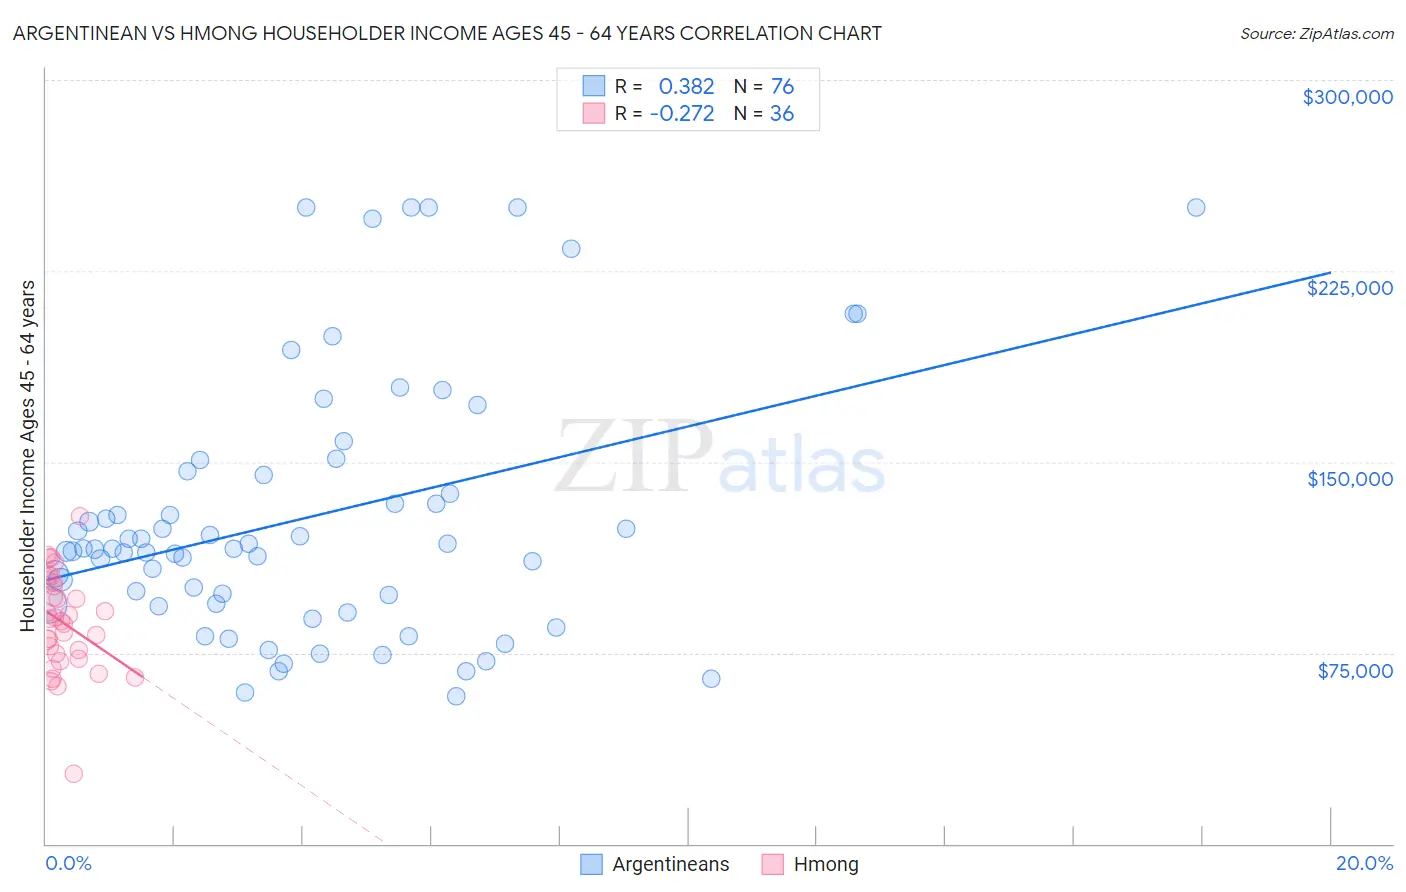 Argentinean vs Hmong Householder Income Ages 45 - 64 years